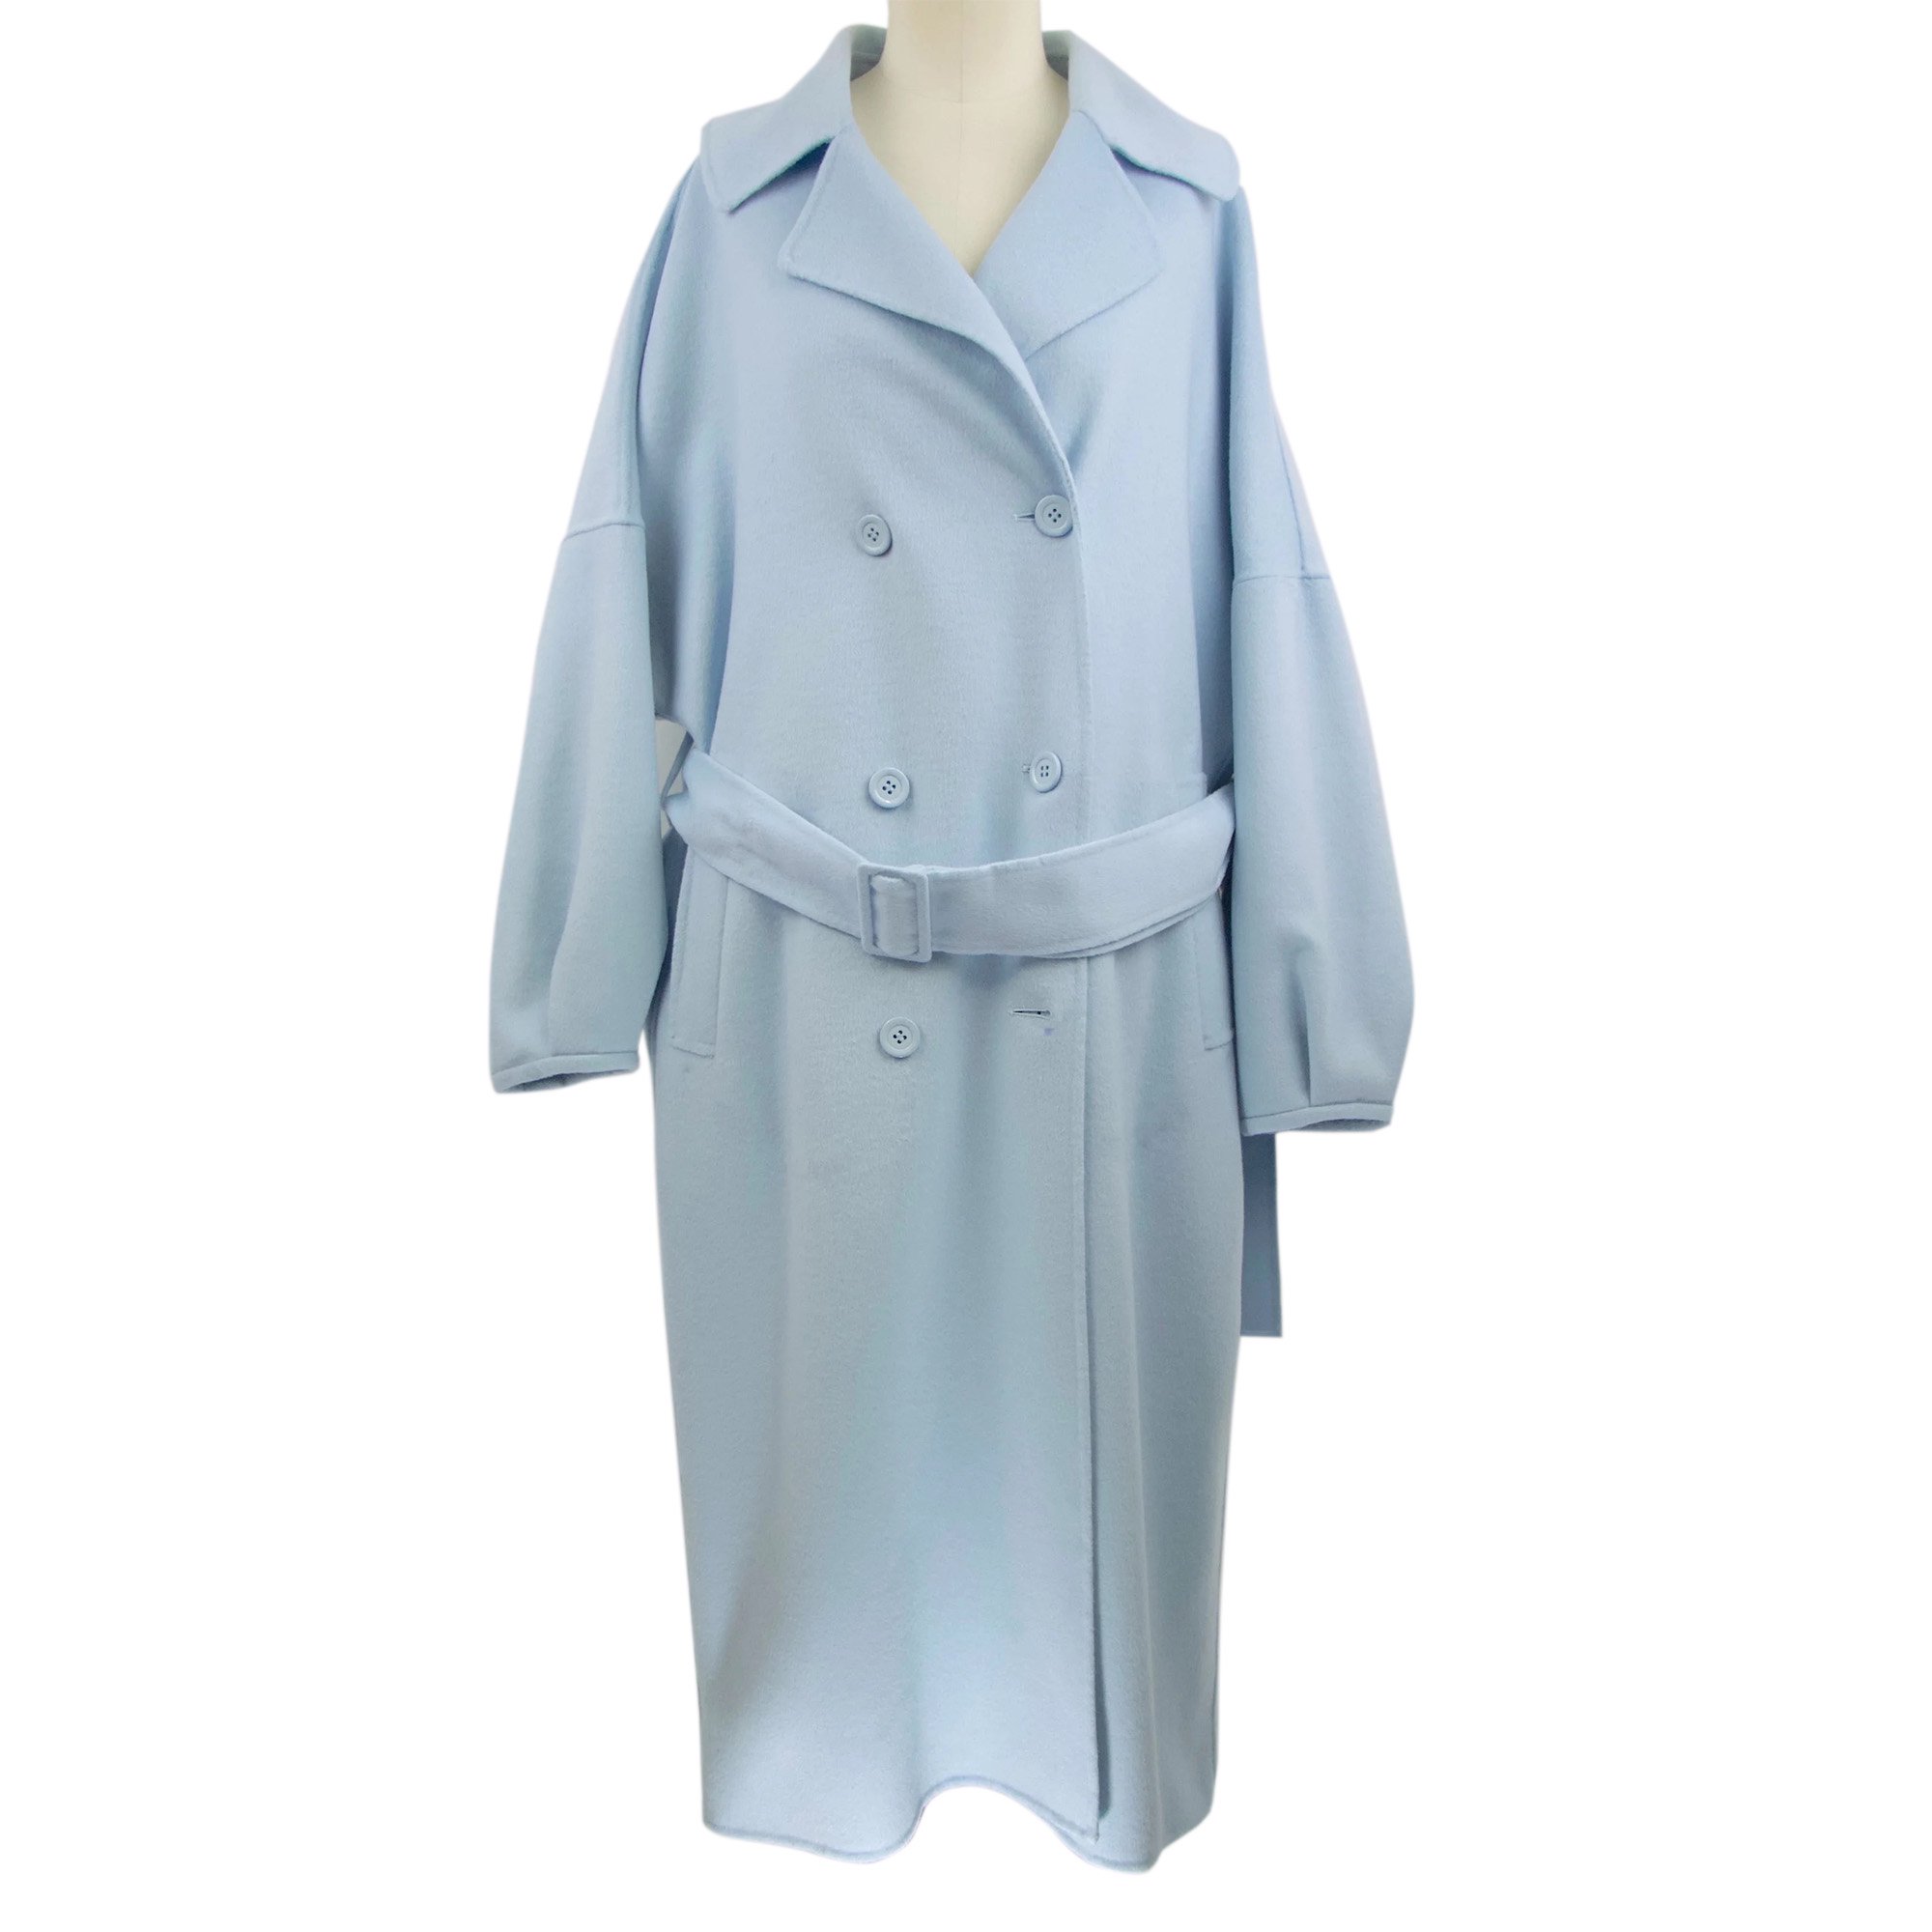 <img class='new_mark_img1' src='https://img.shop-pro.jp/img/new/icons8.gif' style='border:none;display:inline;margin:0px;padding:0px;width:auto;' />STUMBLY Relaxy trench coat